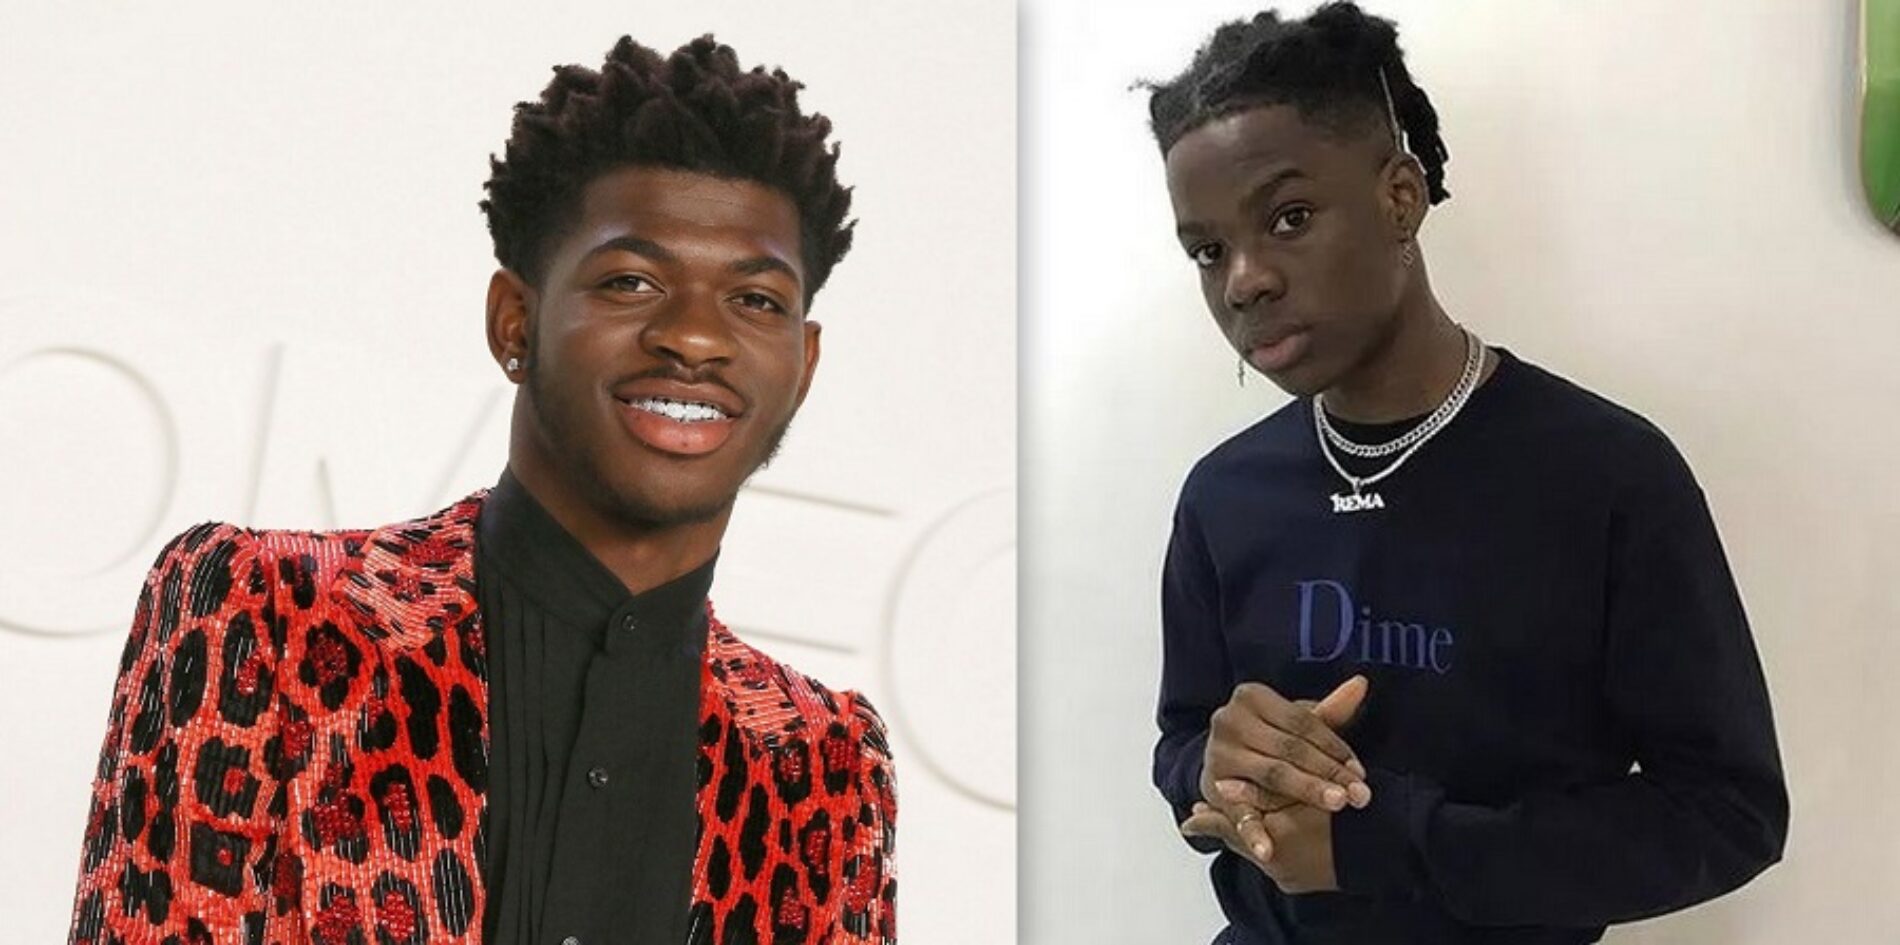 Lil Nas X Comments On Rema’s Instagram Post, And Homophobic Nigerians Have A Meltdown